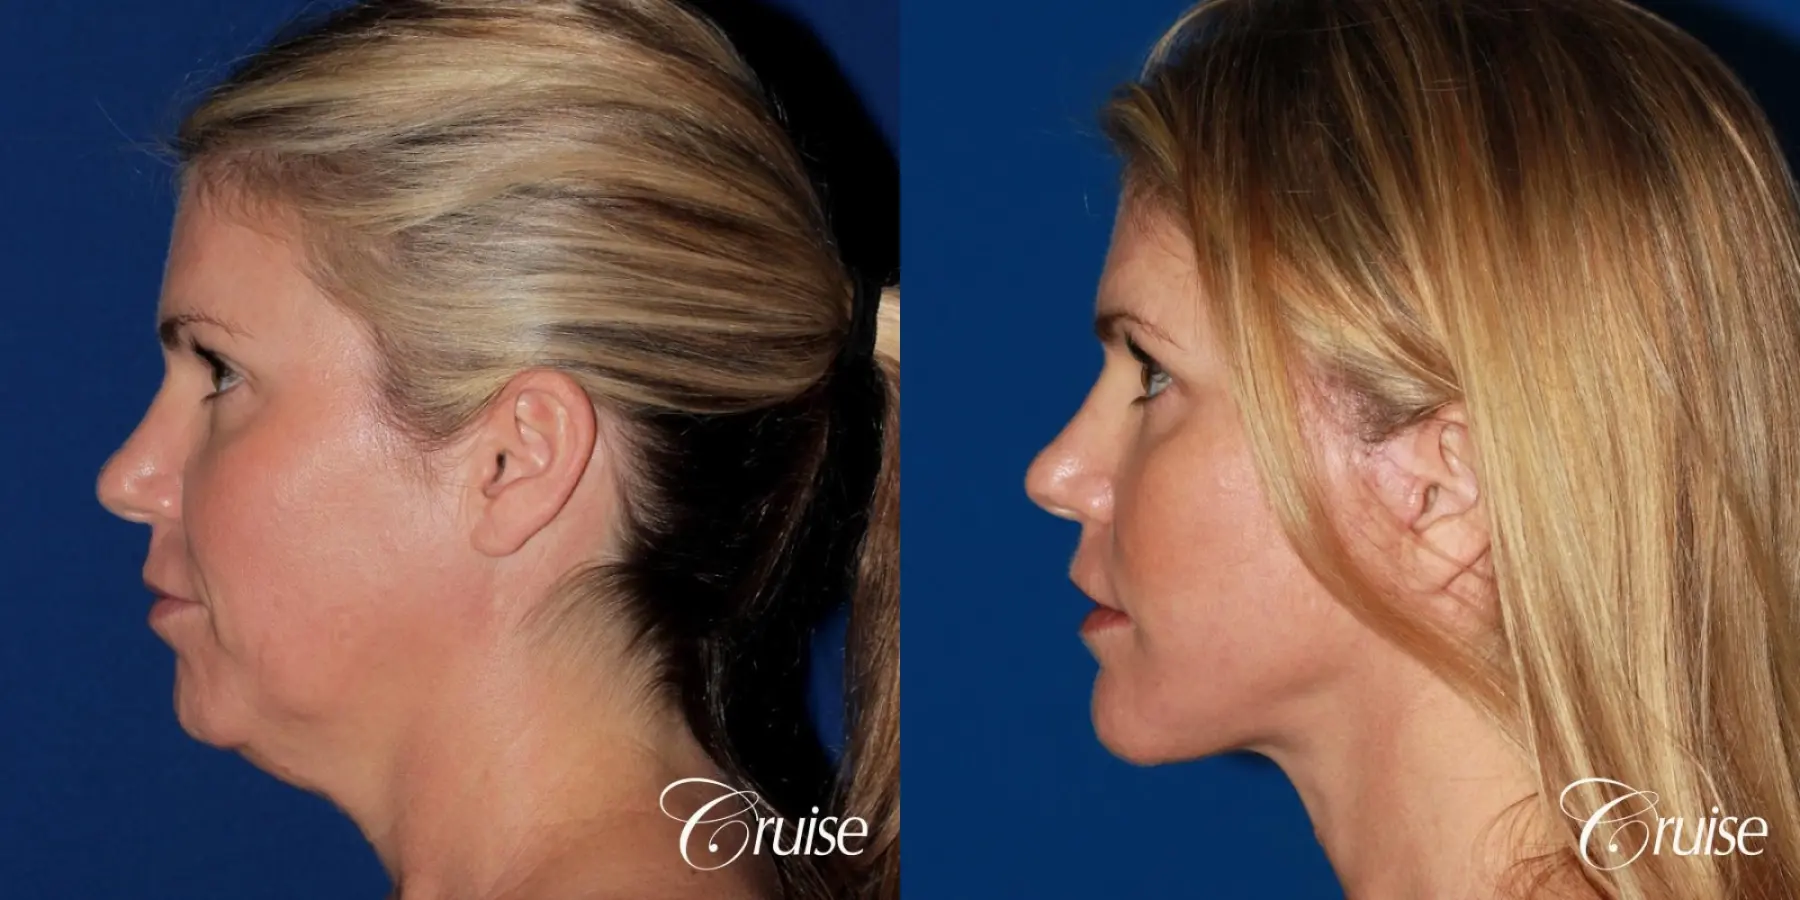 lower facelift with chin liposuction - Before and After 2